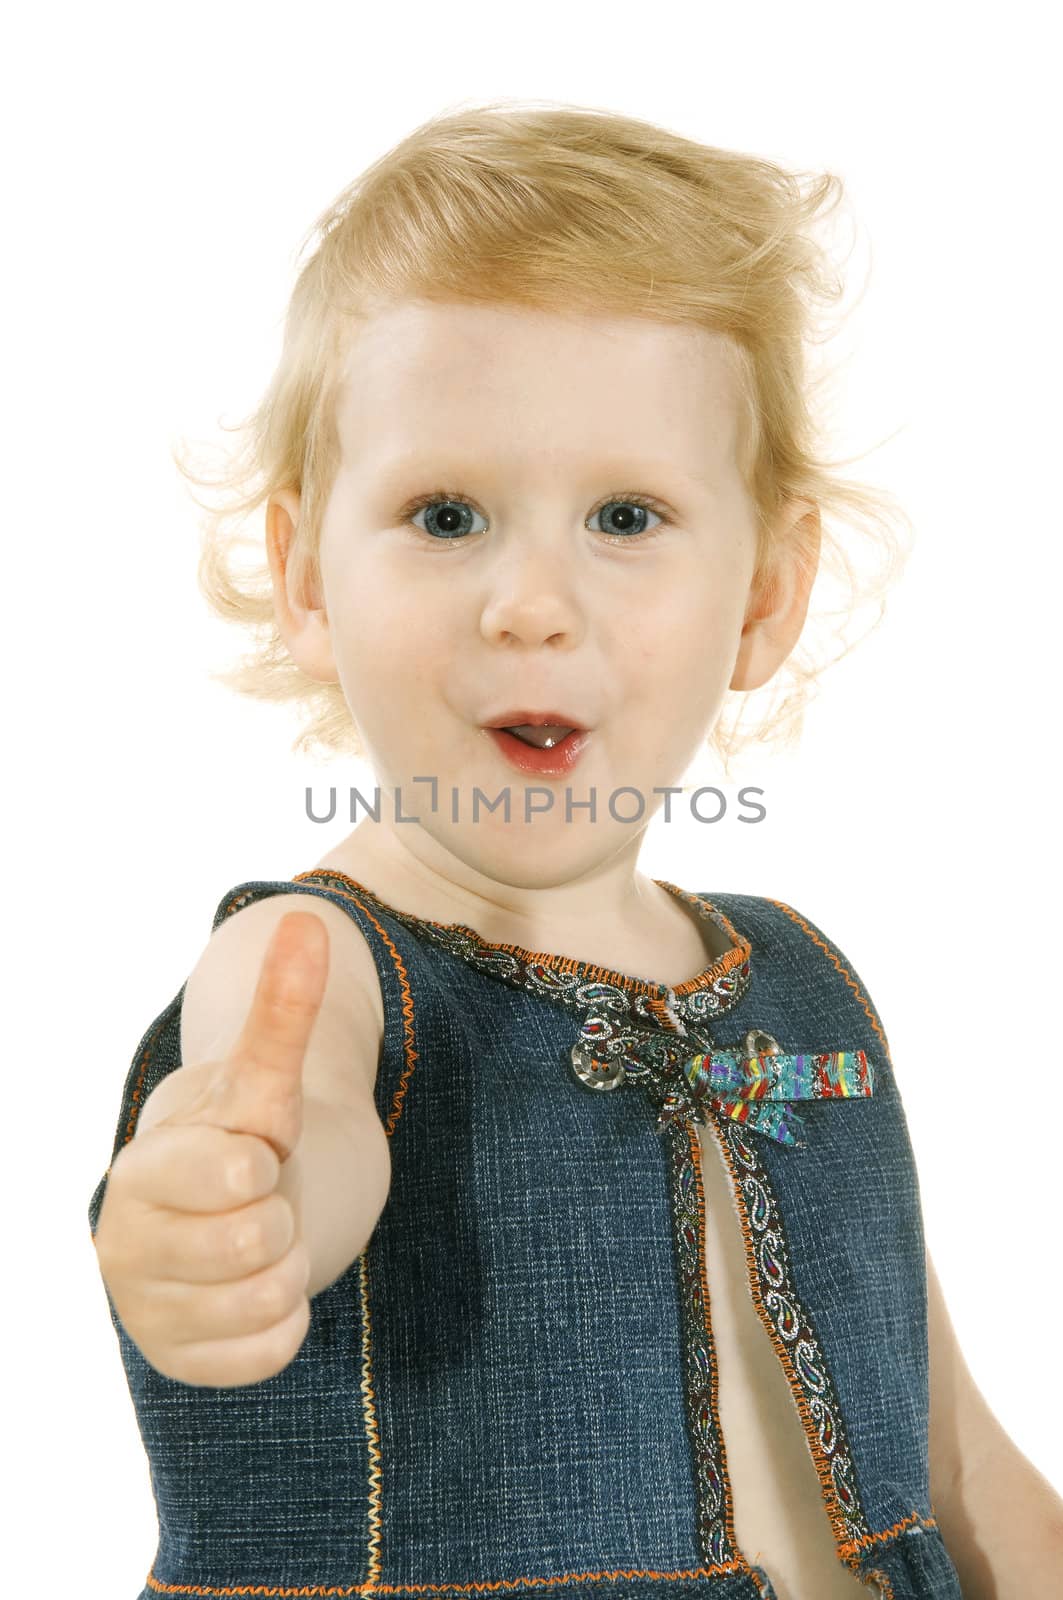 small child smiles insulated on white background